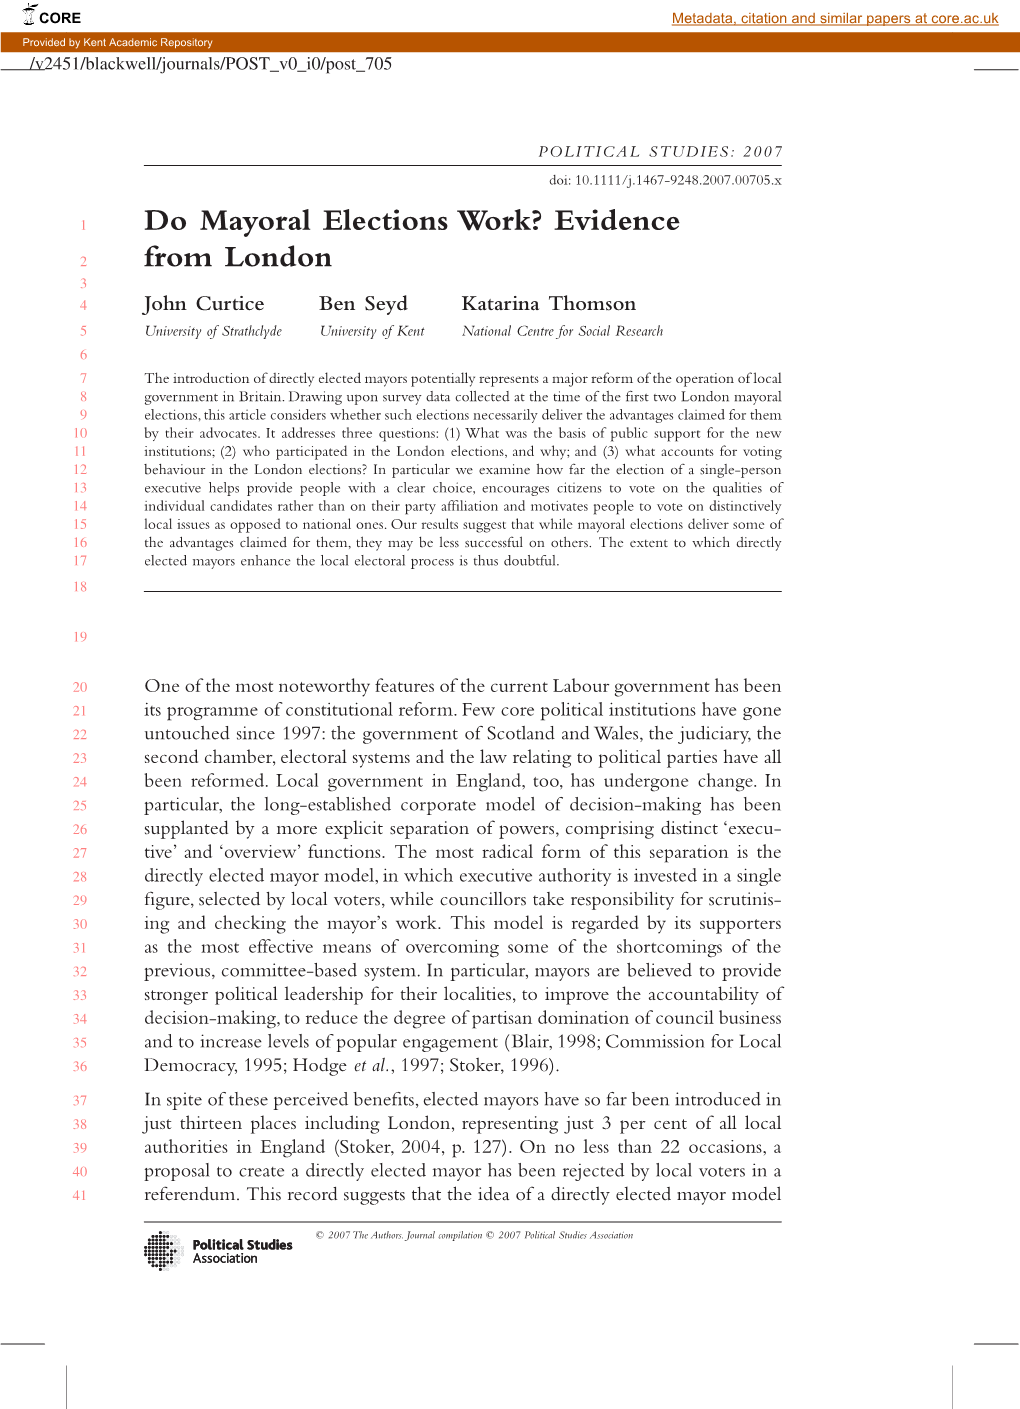 Do Mayoral Elections Work? Evidence from London